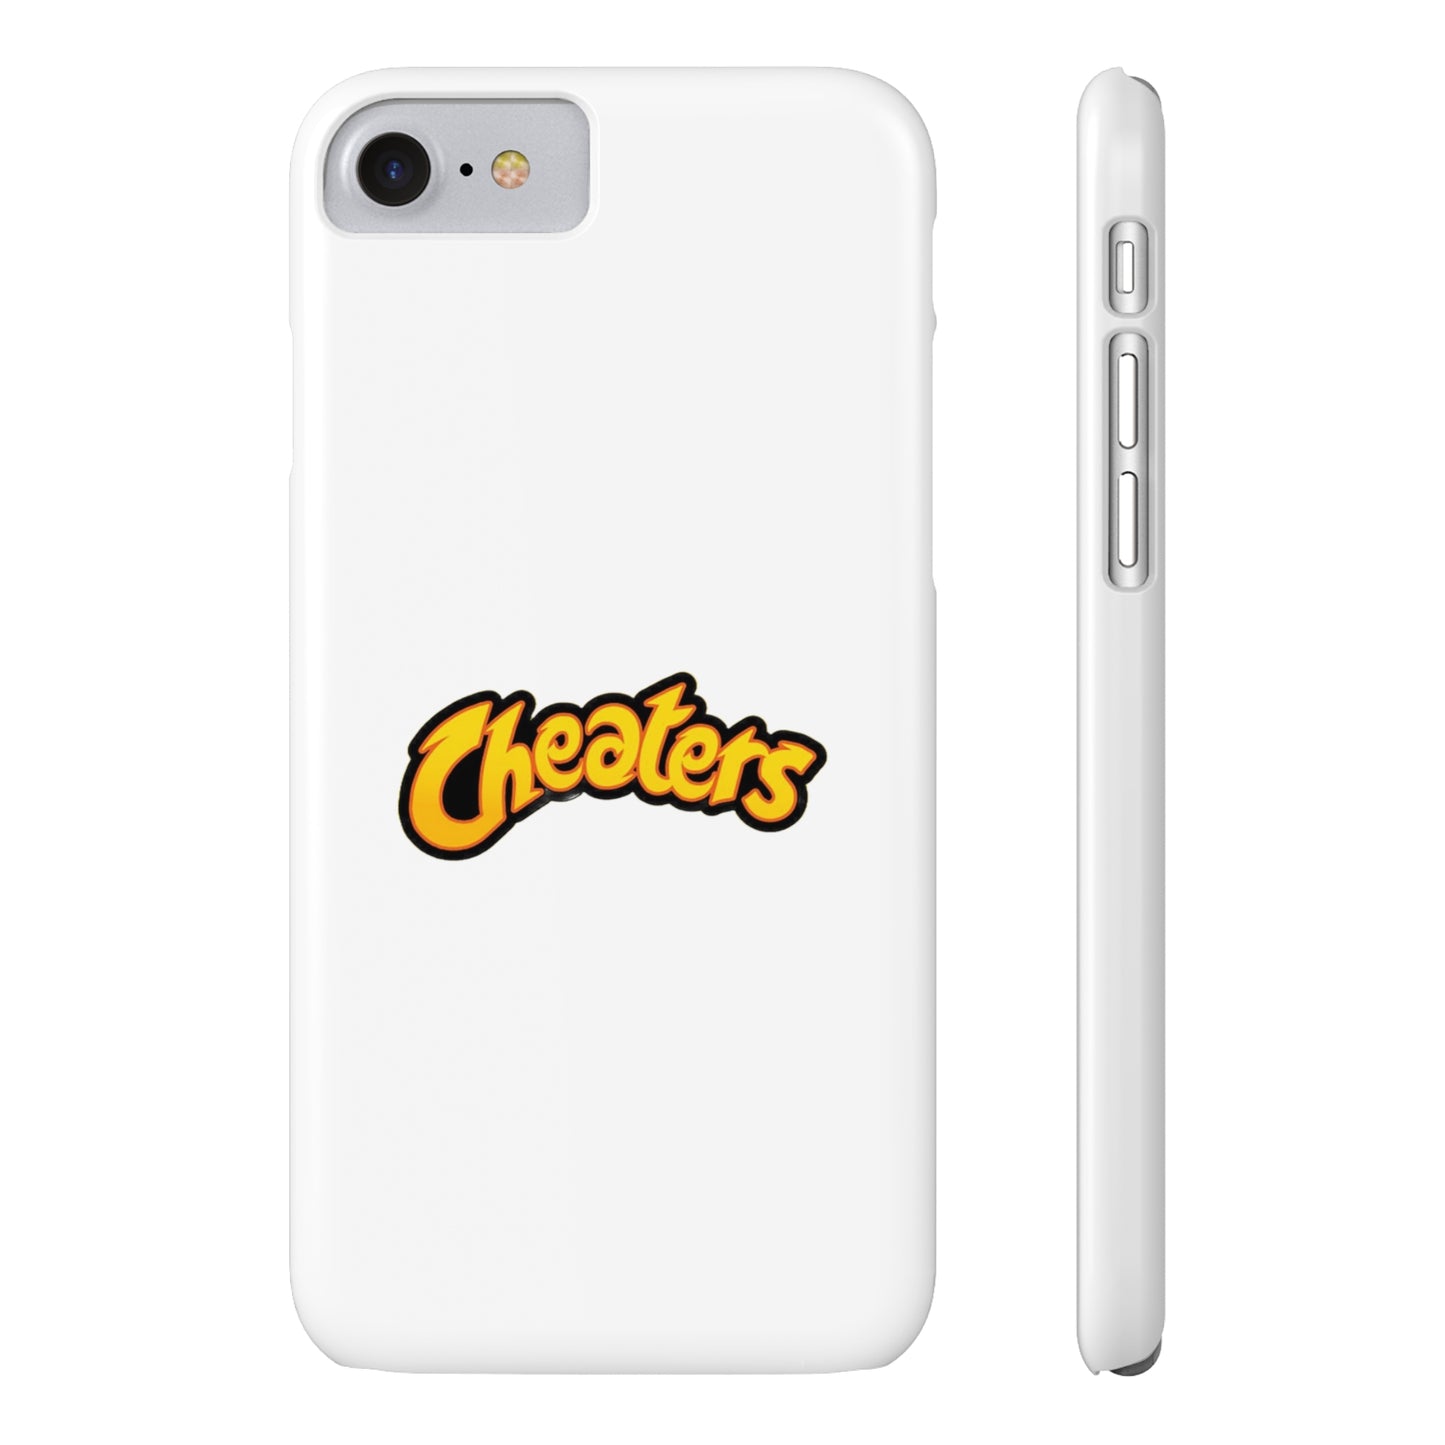 "Cheaters" MagStrong Phone Cases iPhone 7, iPhone 8 Slim